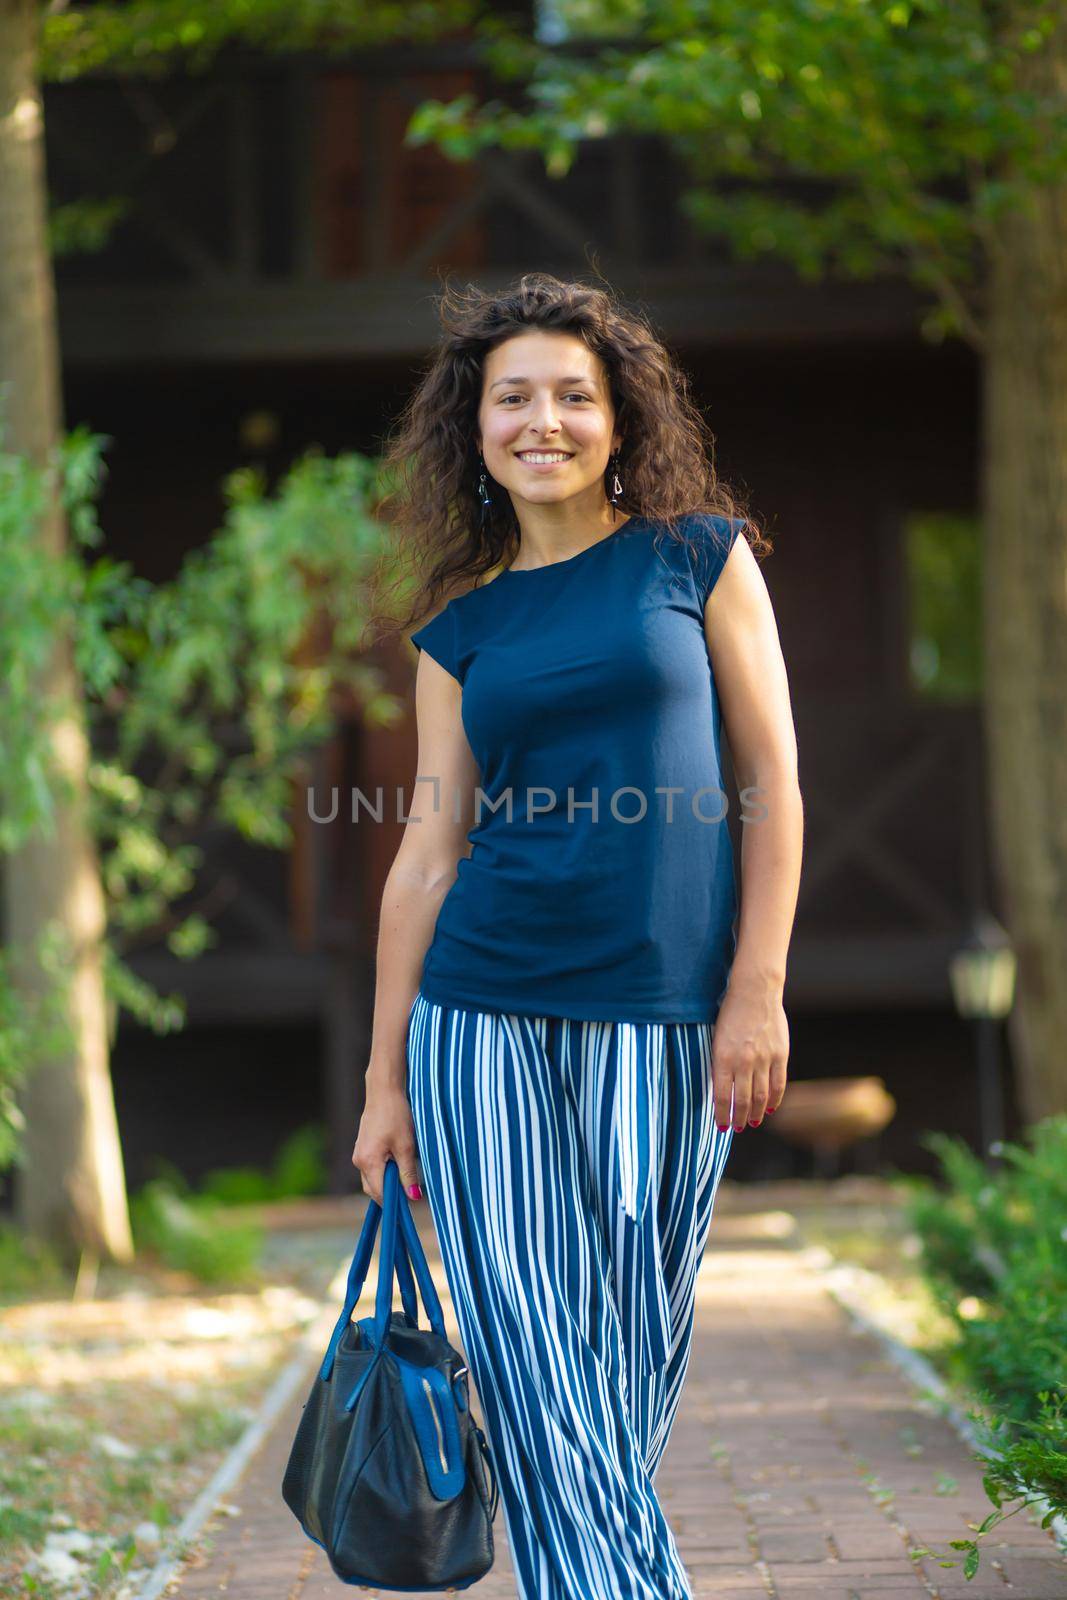 young beautiful brunette with curly hair, in a stylish outfit with a bag. Enjoying a bright summer day in a green park.